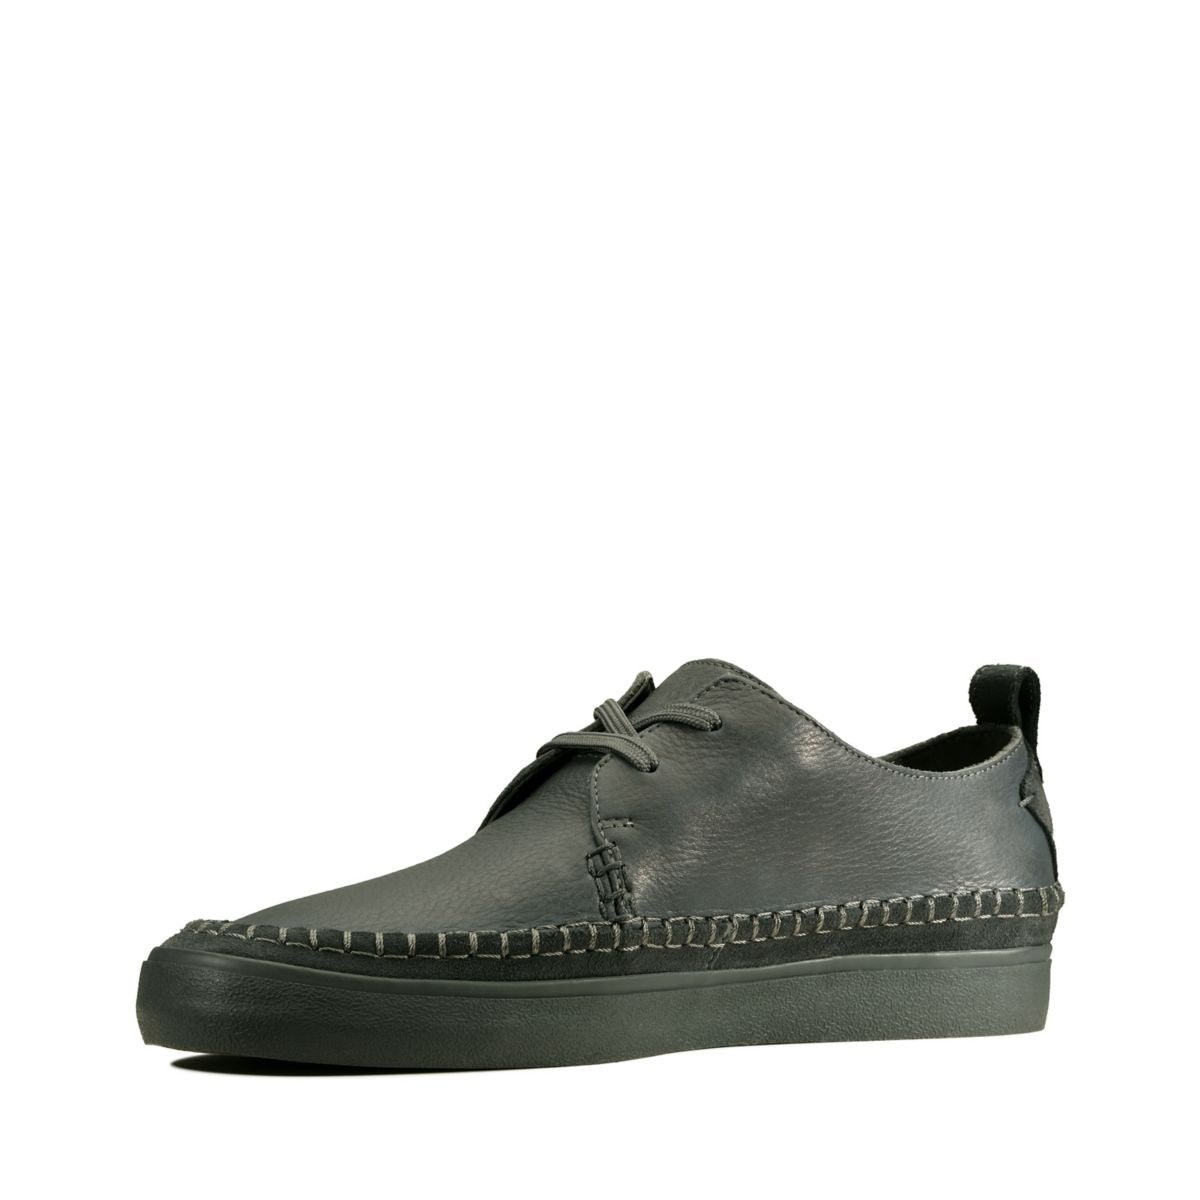 Buy Clarks Kessell Craft Shoes For Men 